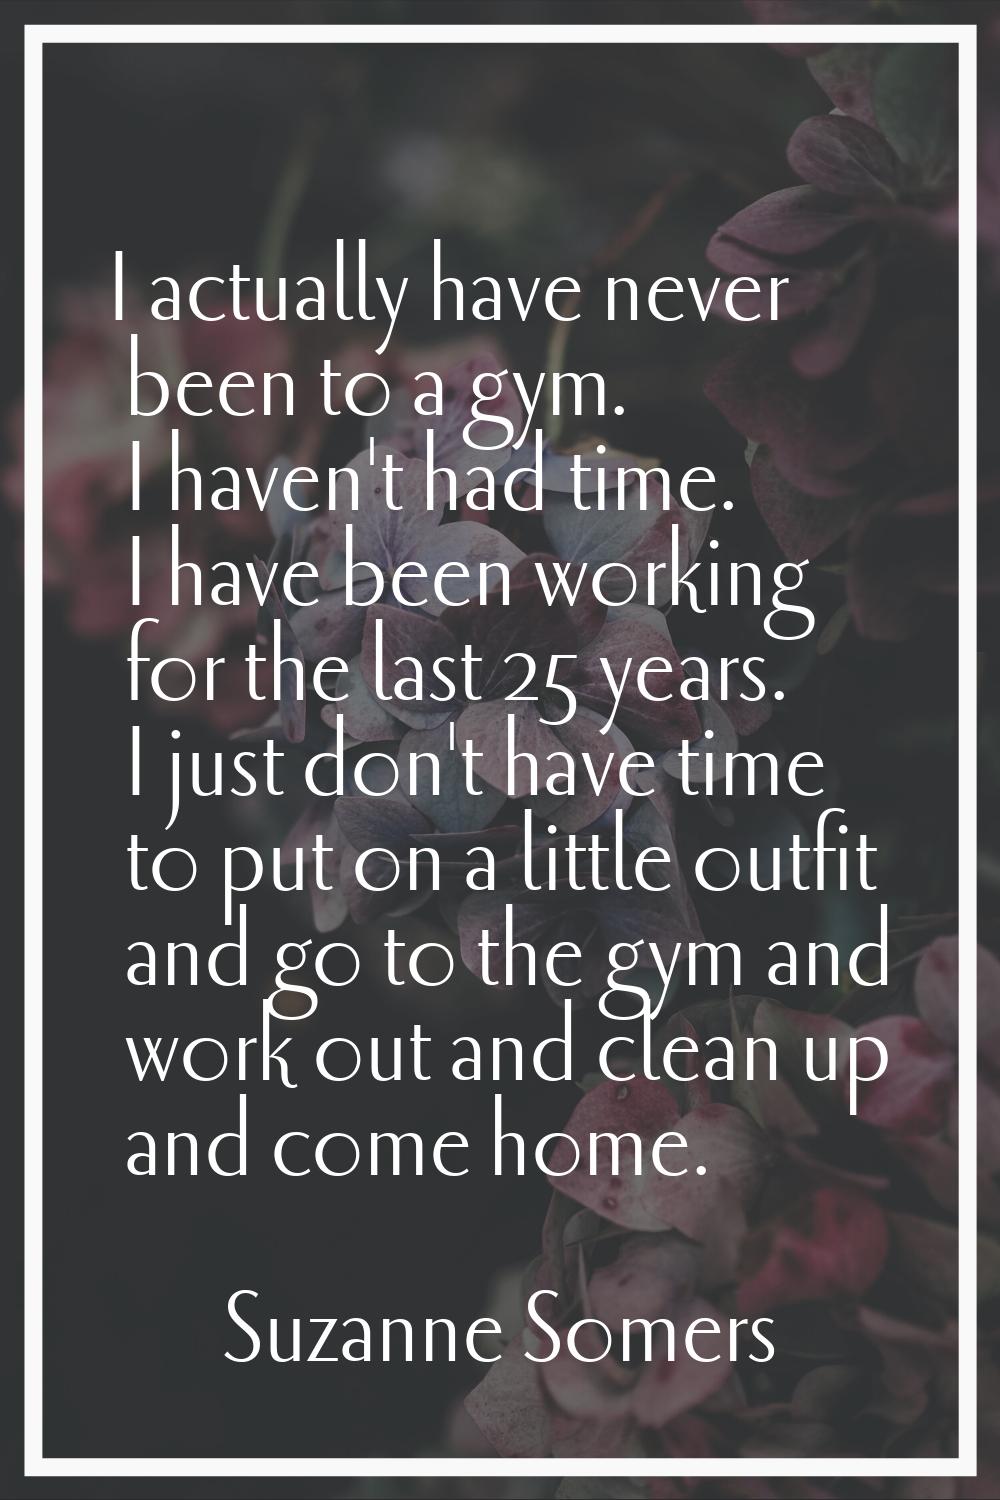 I actually have never been to a gym. I haven't had time. I have been working for the last 25 years.